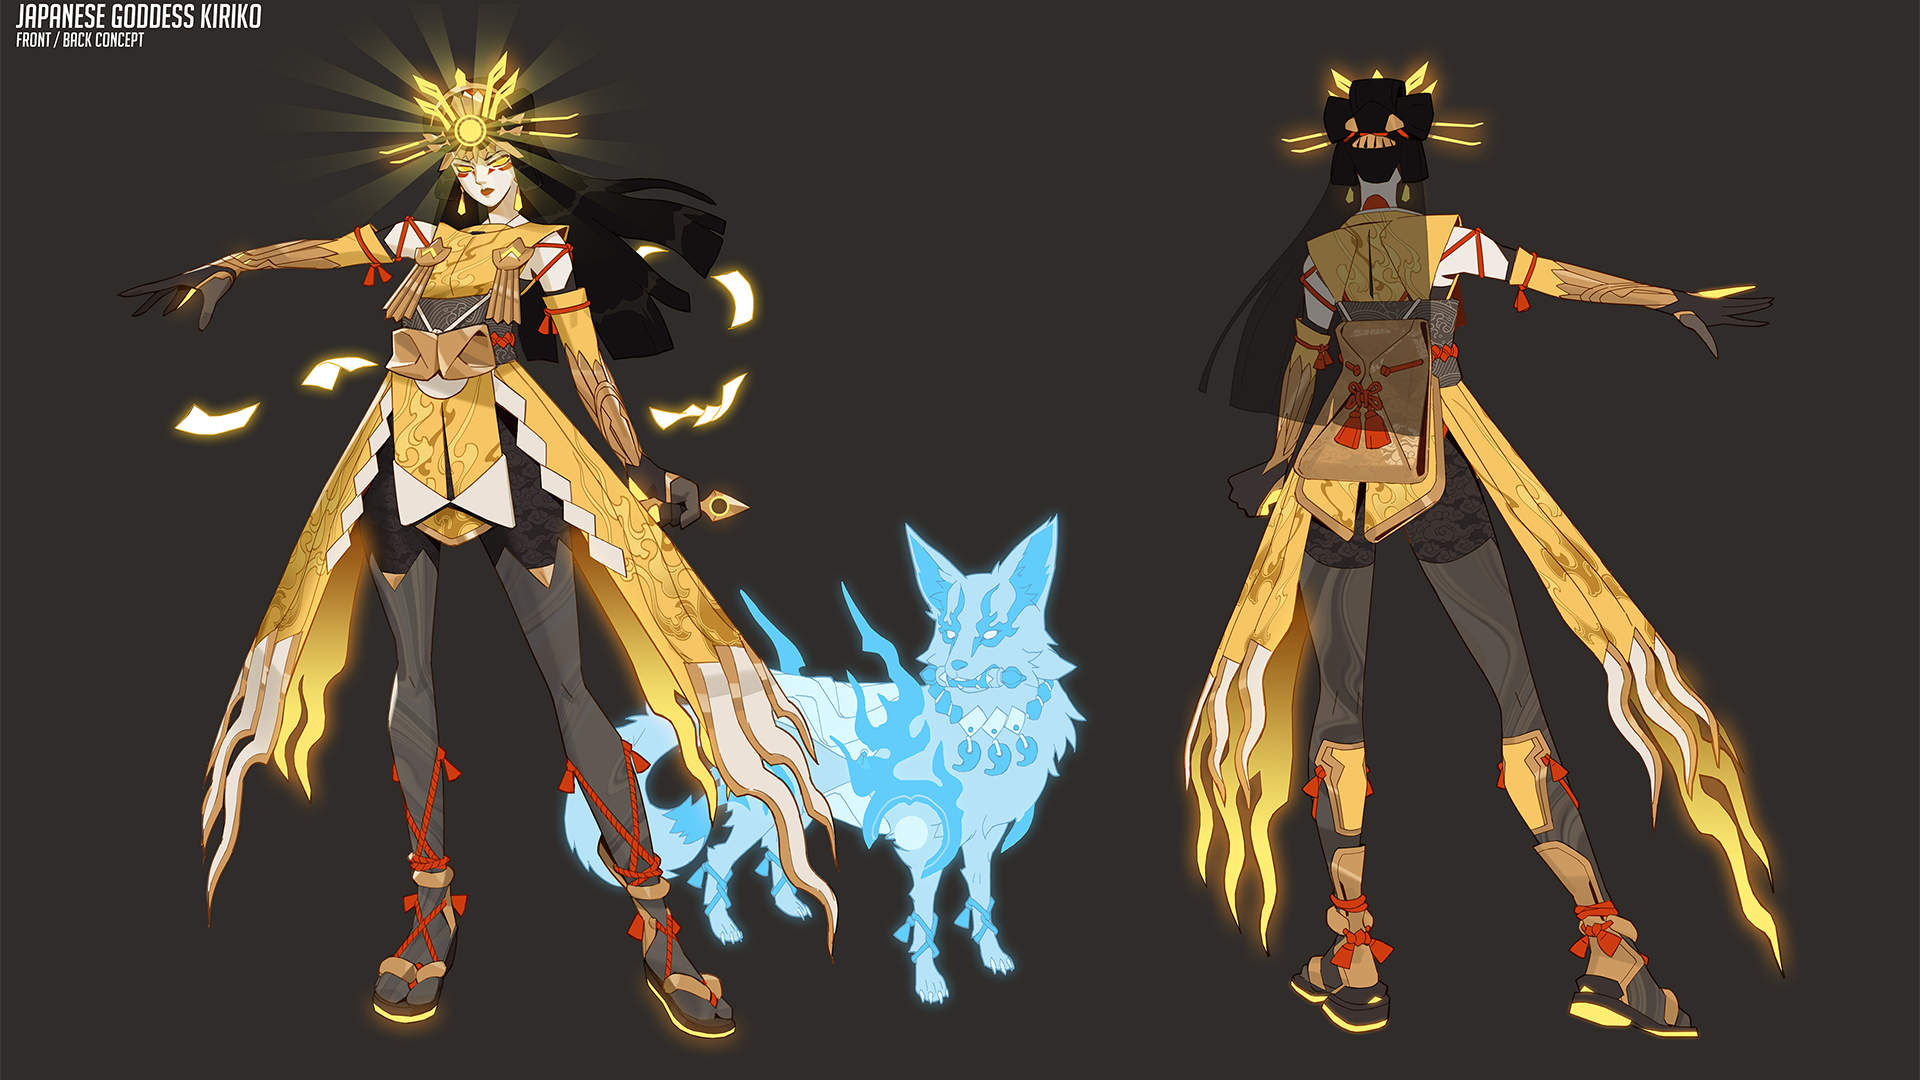 Concept art of Amaterasu Kiriko Mythic skin labeled “Japanese Goddess Kiriko Front/Back concept” in the top left. The skin has gold and bronze coloring with pieces of red rope tying it together around her sandals and legs, and on her back. Her legs/leggings are dark gray, and the bronze sleeves with dark gloves are removed from the rest of the dress showing her shoulders. Her gold headdress is illuminated.